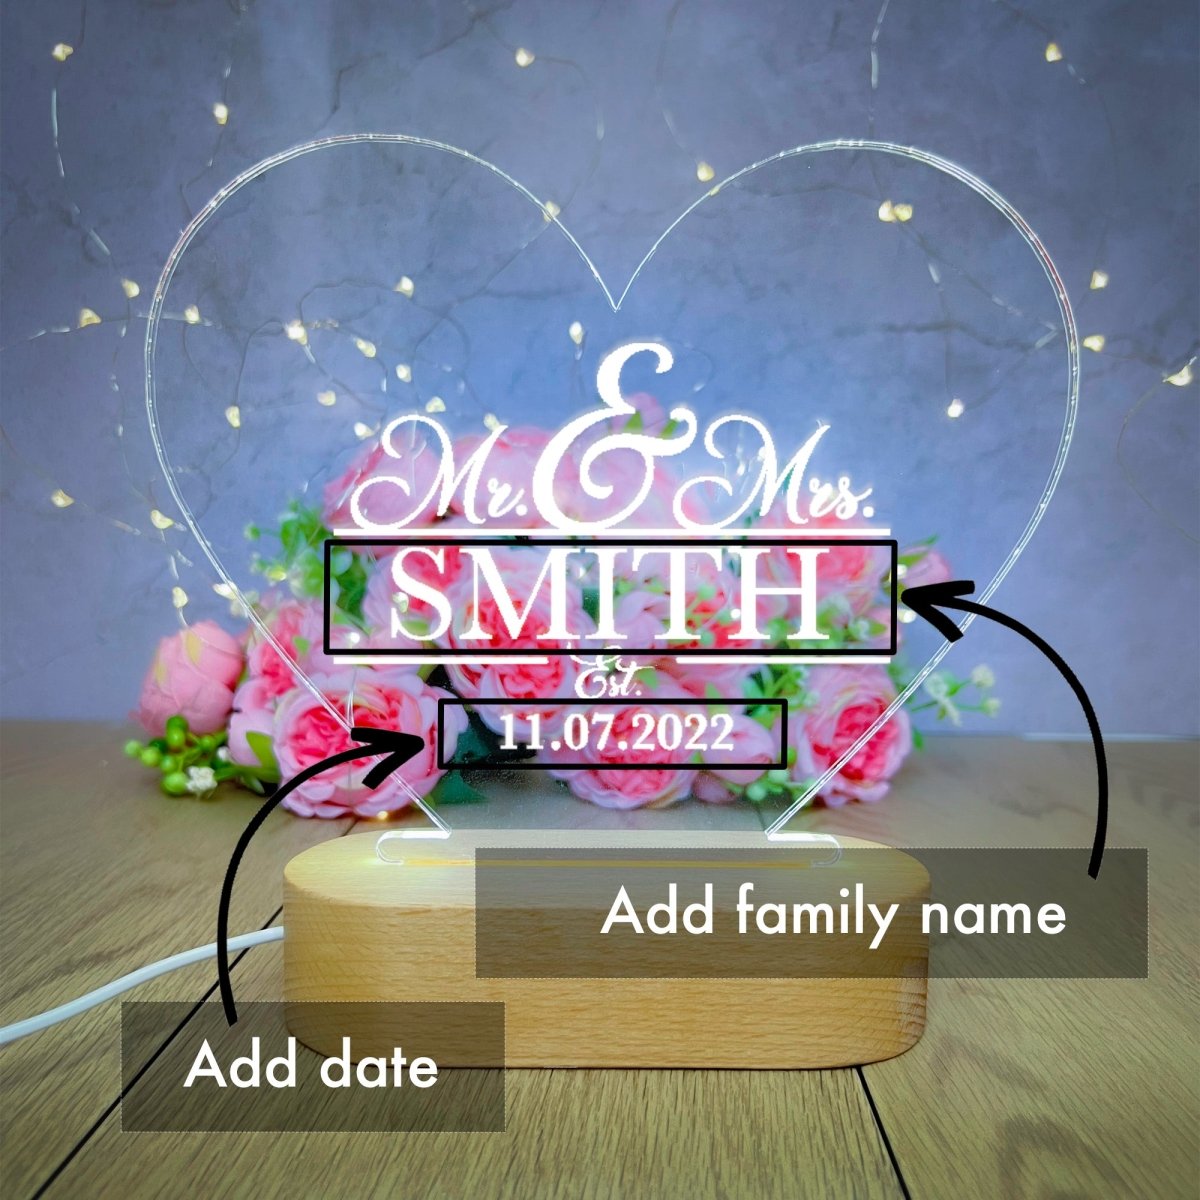 Mr And Mrs Gifts Personalised Engagement Gifts Wedding Gifts Anniversary Gifts | LED Lamp Night Light    Accessories Gifts UK